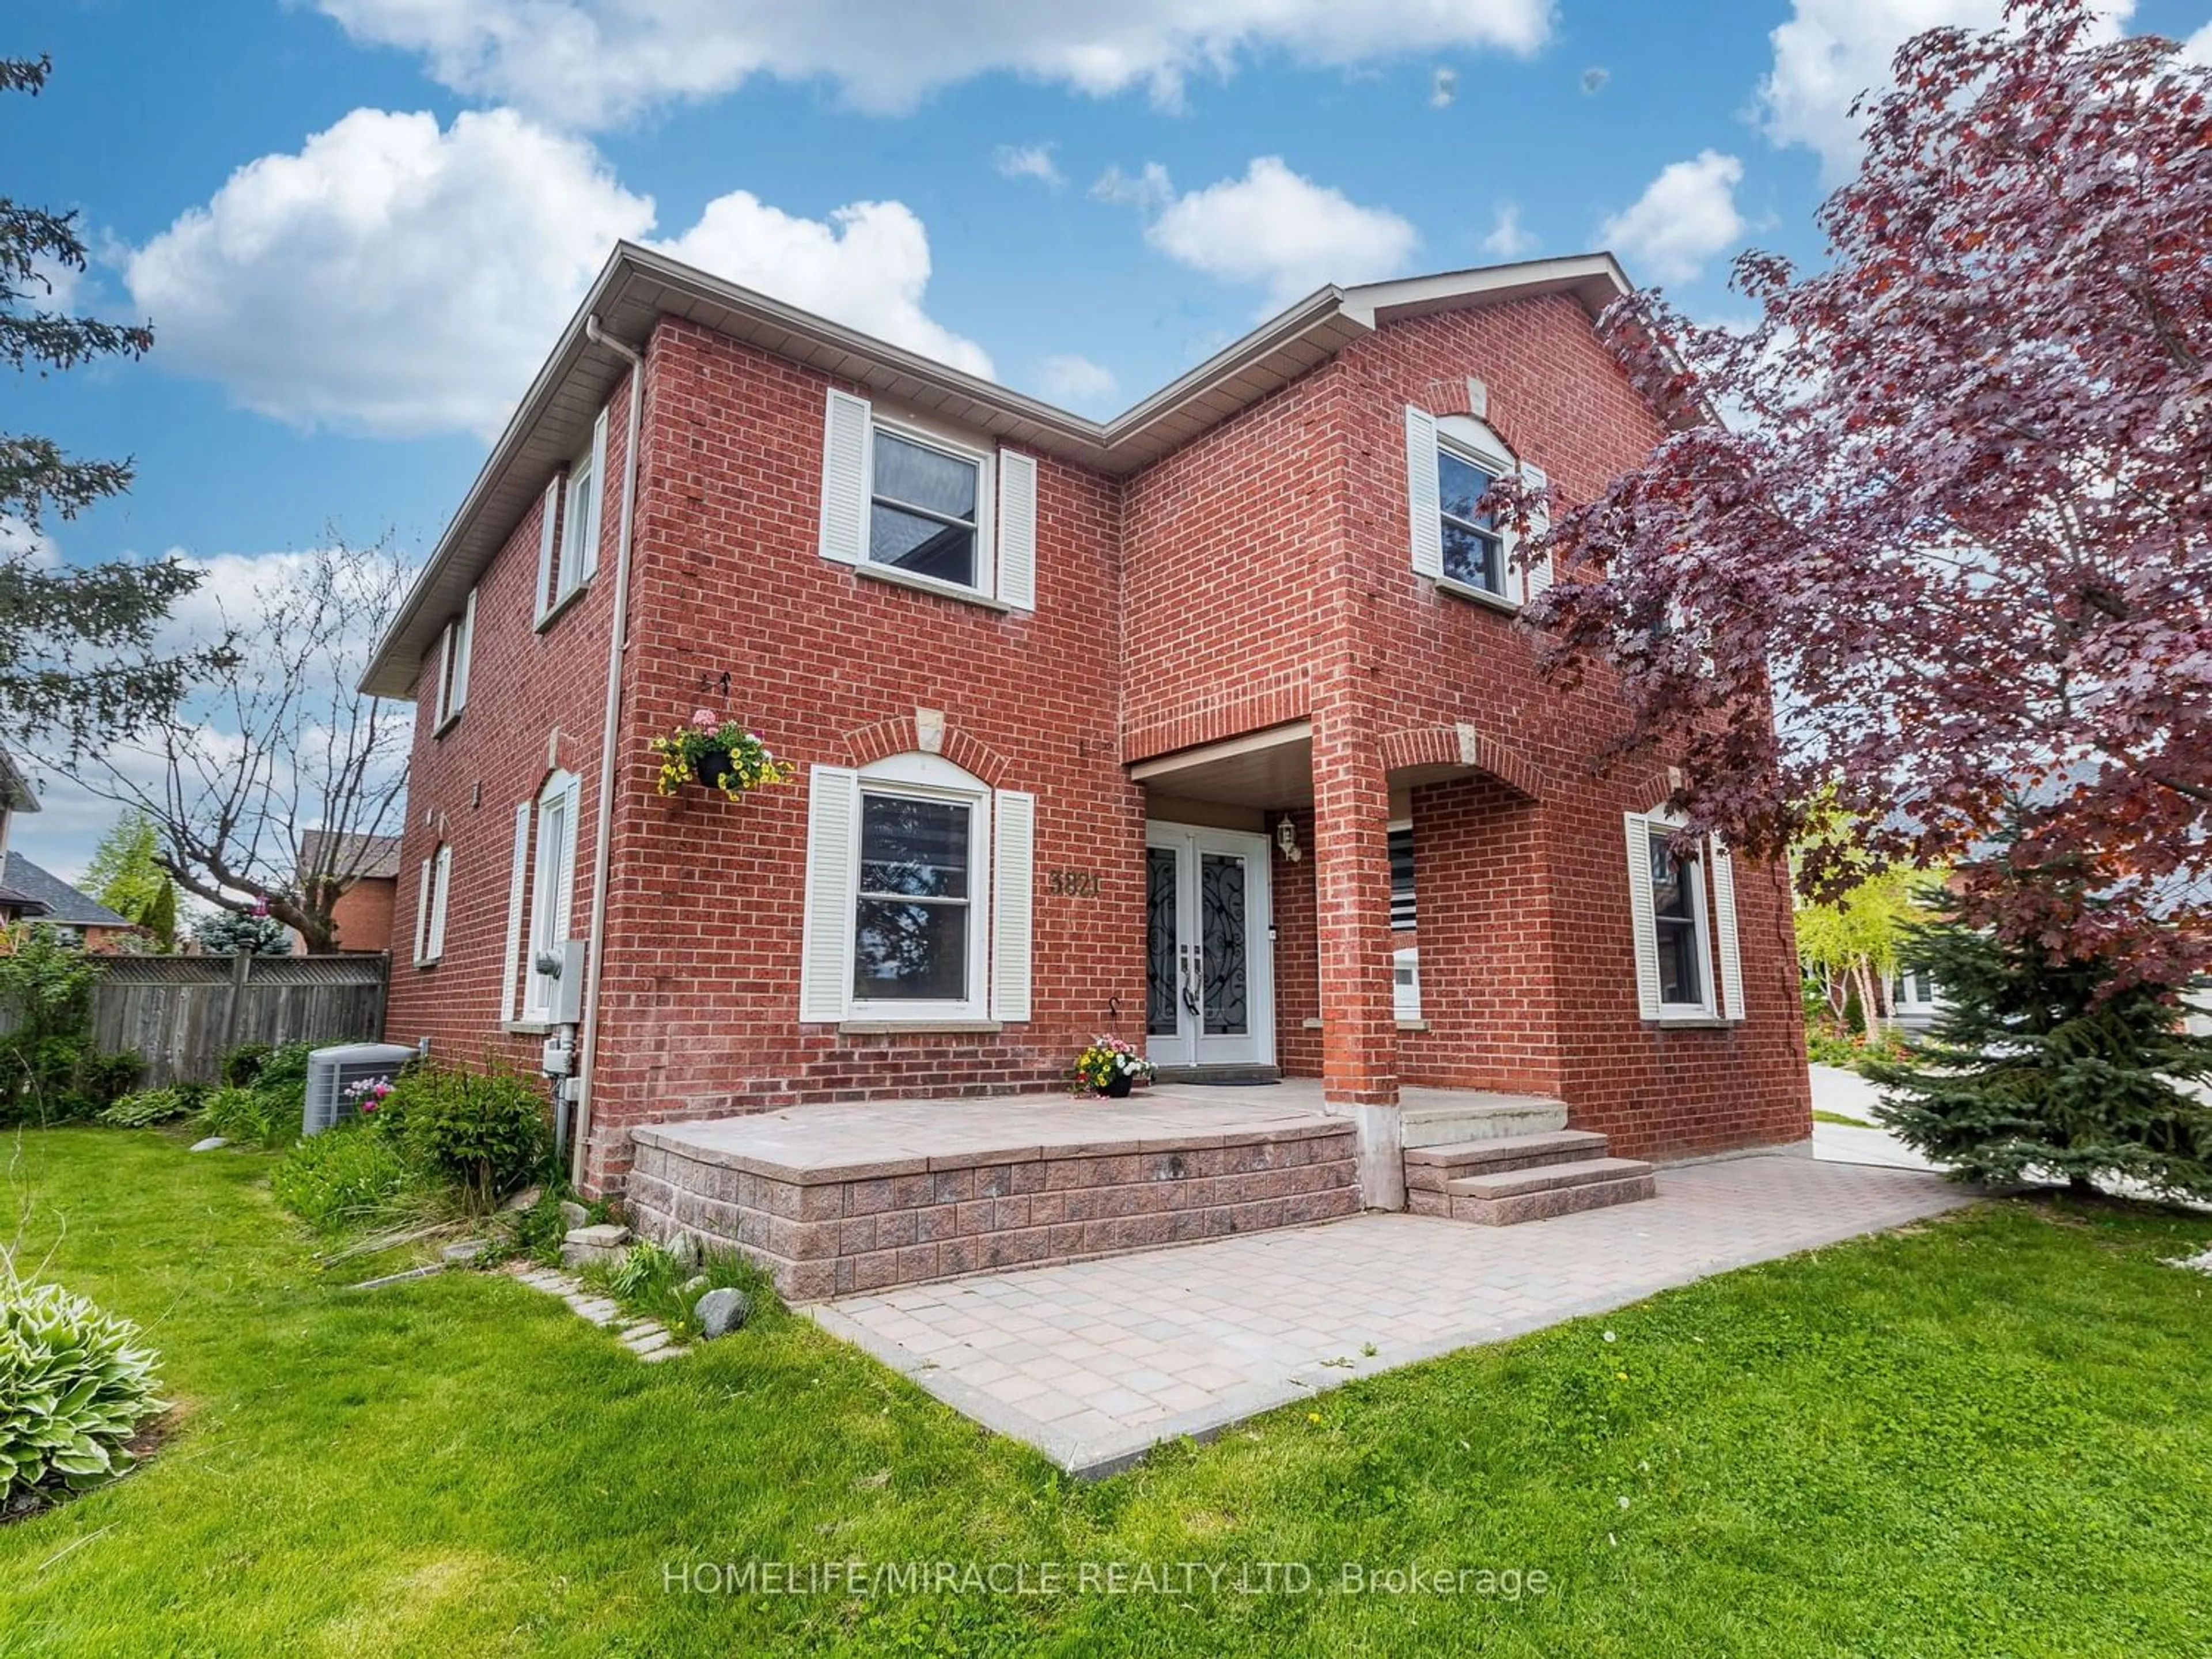 Home with brick exterior material for 3821 Trelawny Circ, Mississauga Ontario L5N 5J6